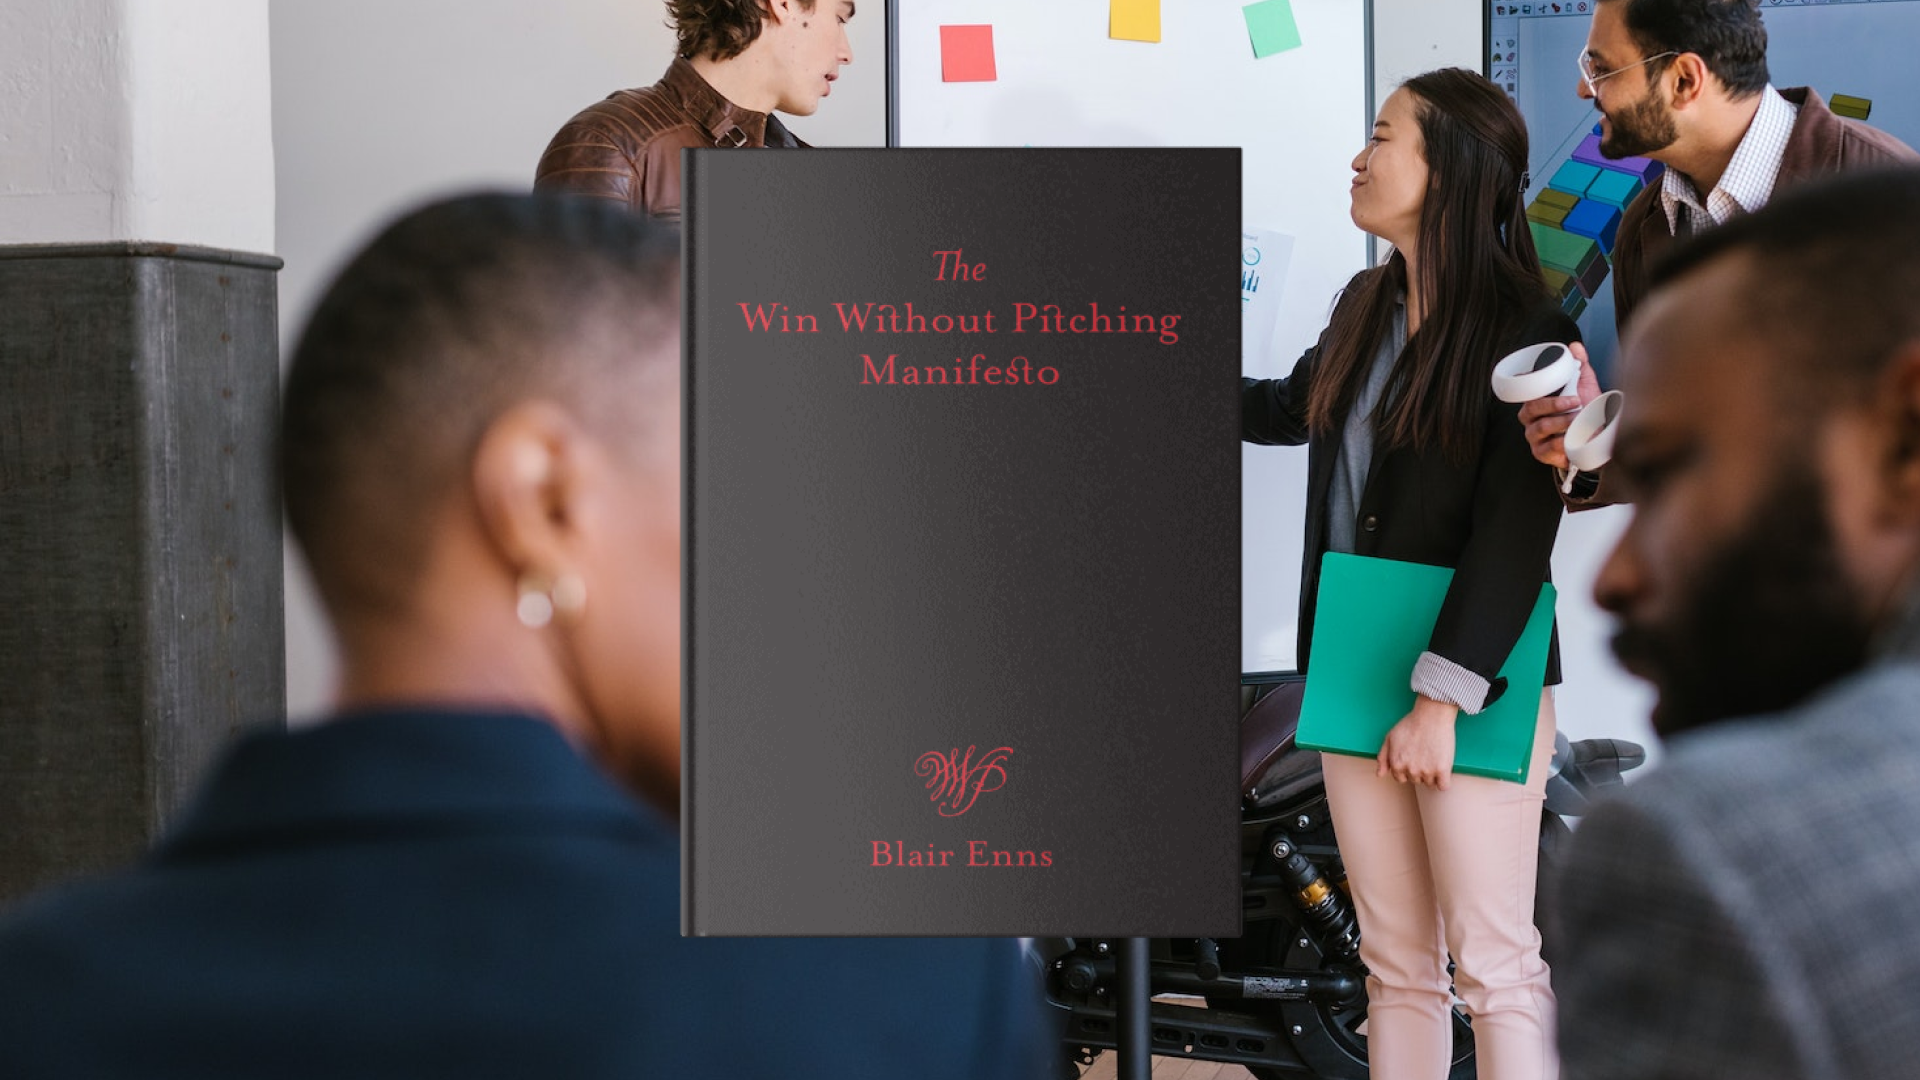 The Win Without Pitching Manifesto by Blair Enns